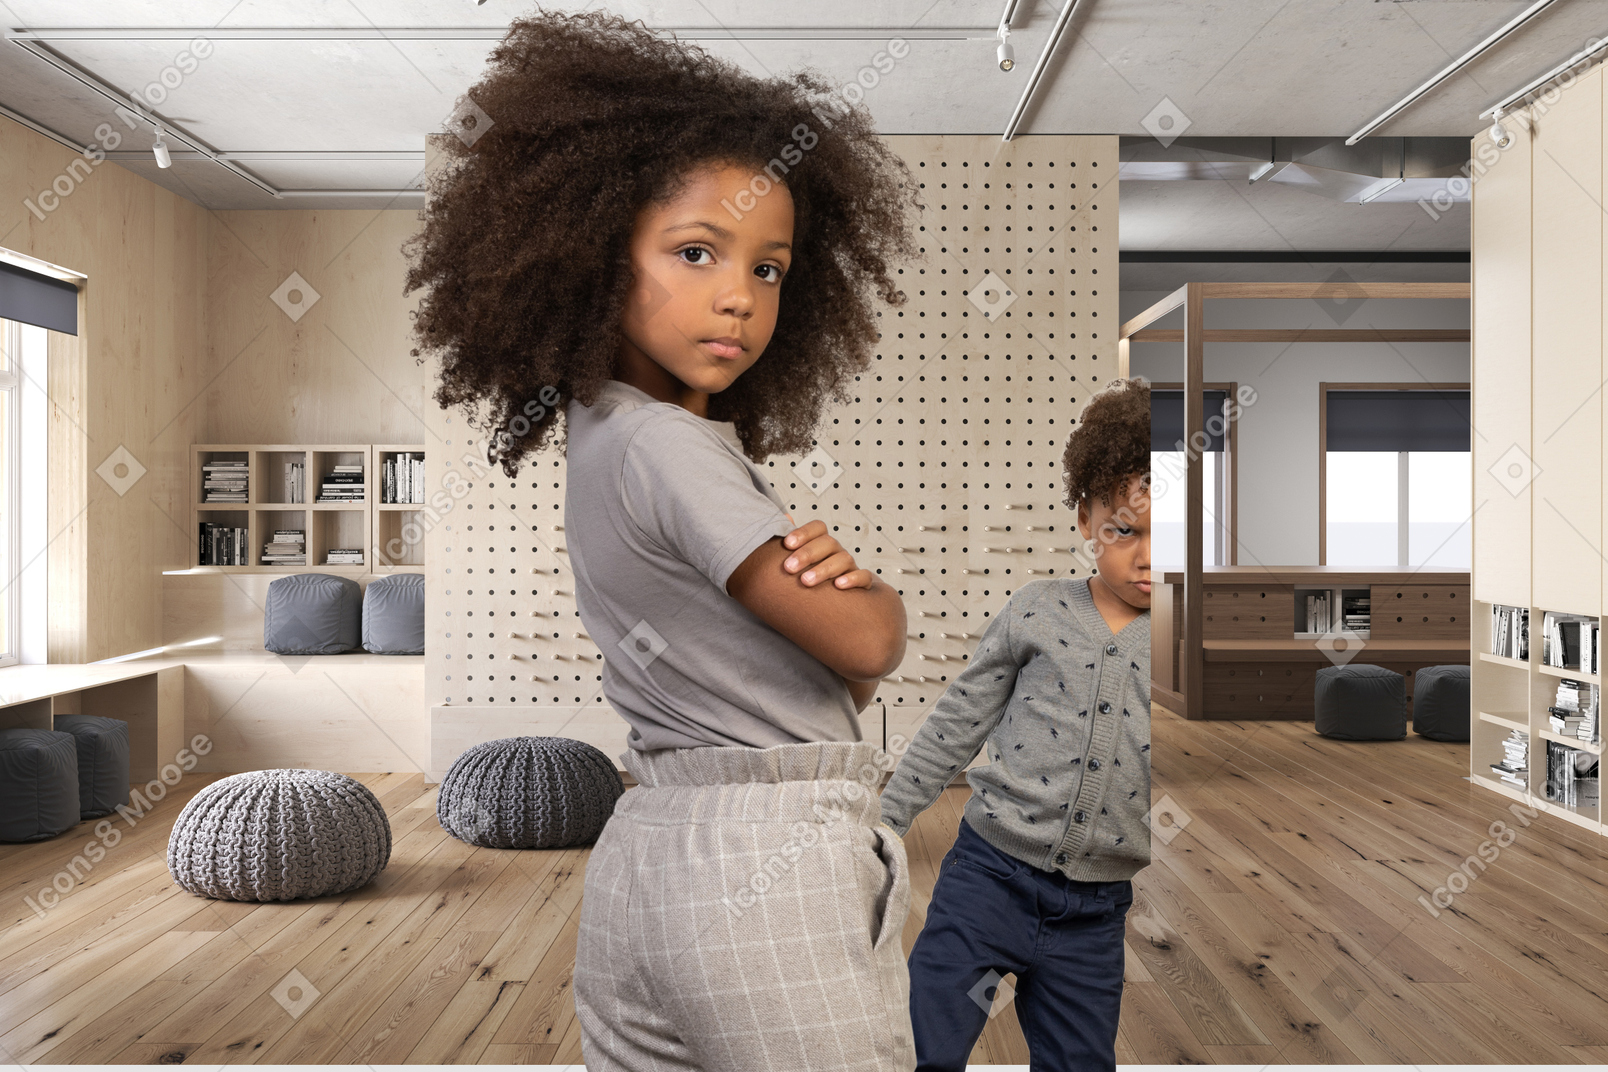 Two children standing in a room with wooden floors